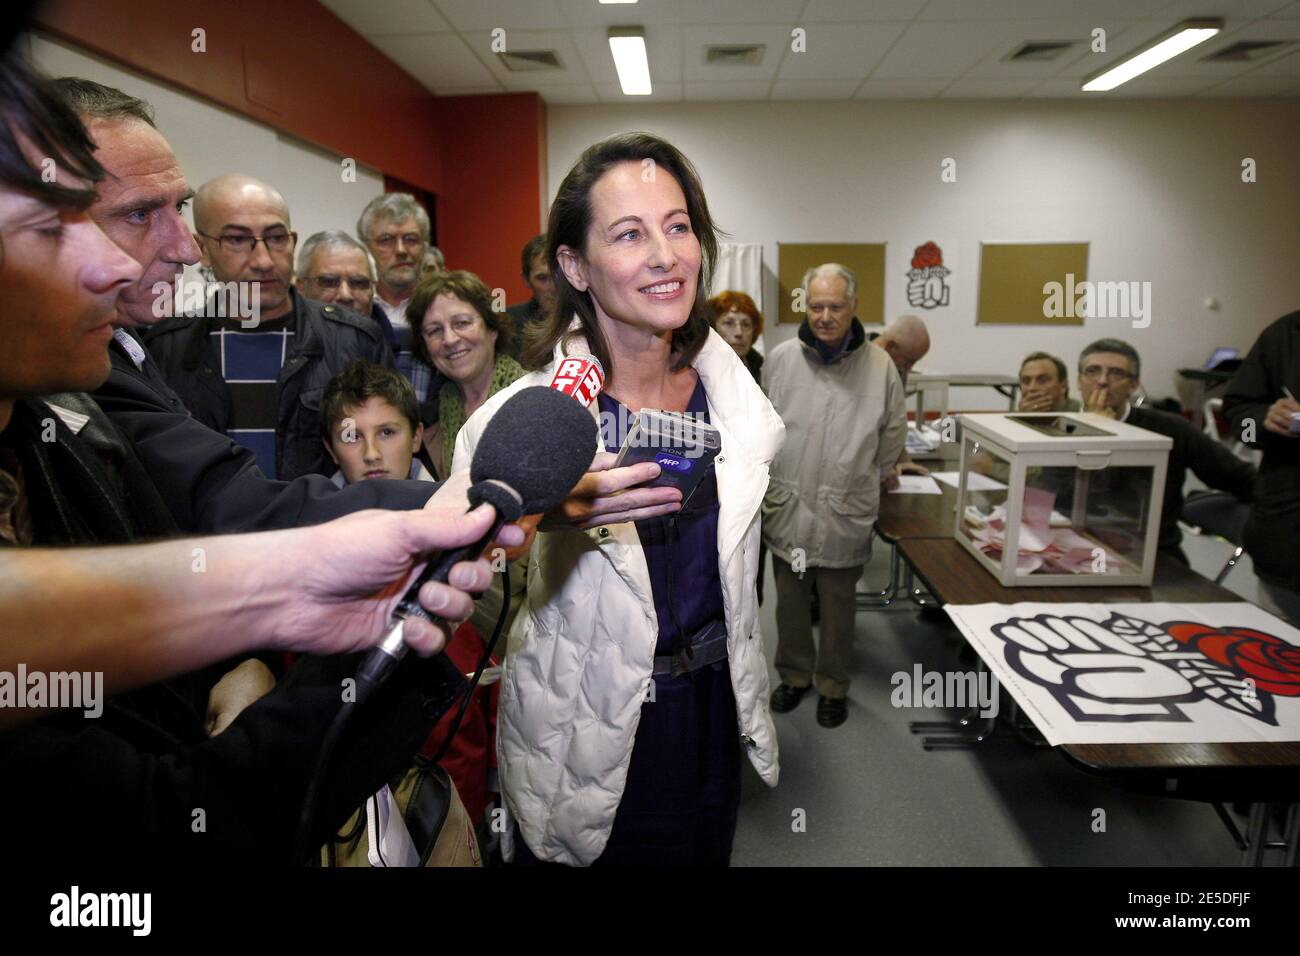 Segolene Royal, one of three candidates who is campaigning to become head of French Socialist Party at a polling station in Melle, France on November 20, 2008. Photo by Patrick Bernard/ABACAPRESS.COM Stock Photo